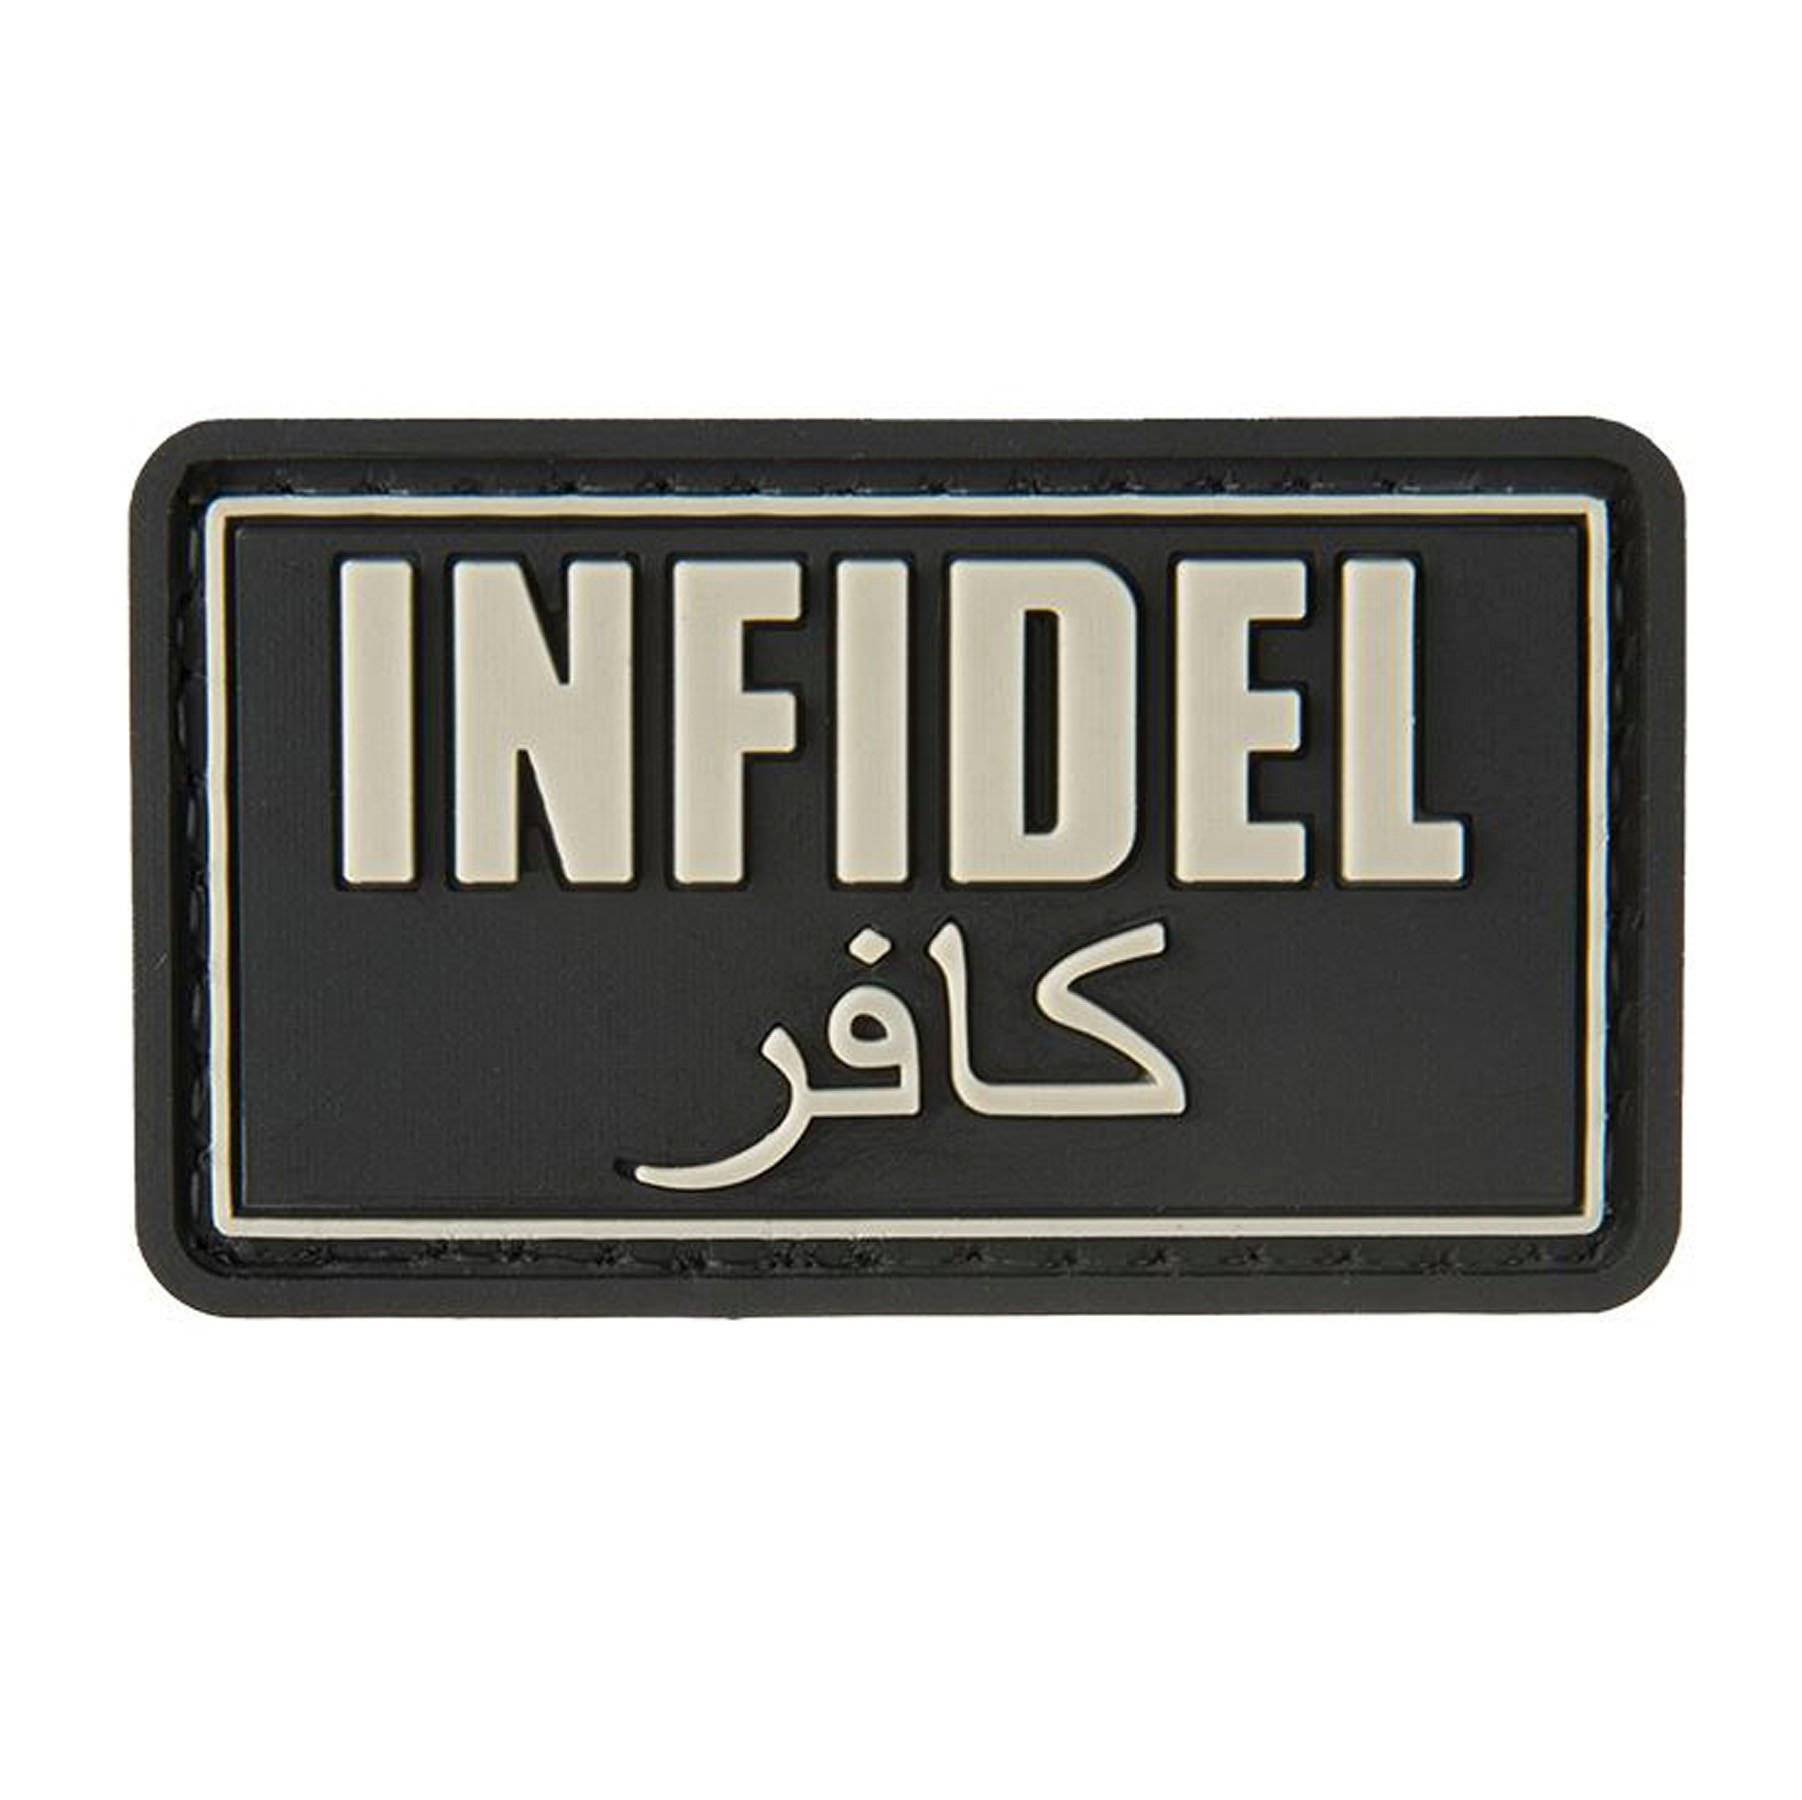 PFI Fashions Neo Tactical Infidel PVC Morale Patch